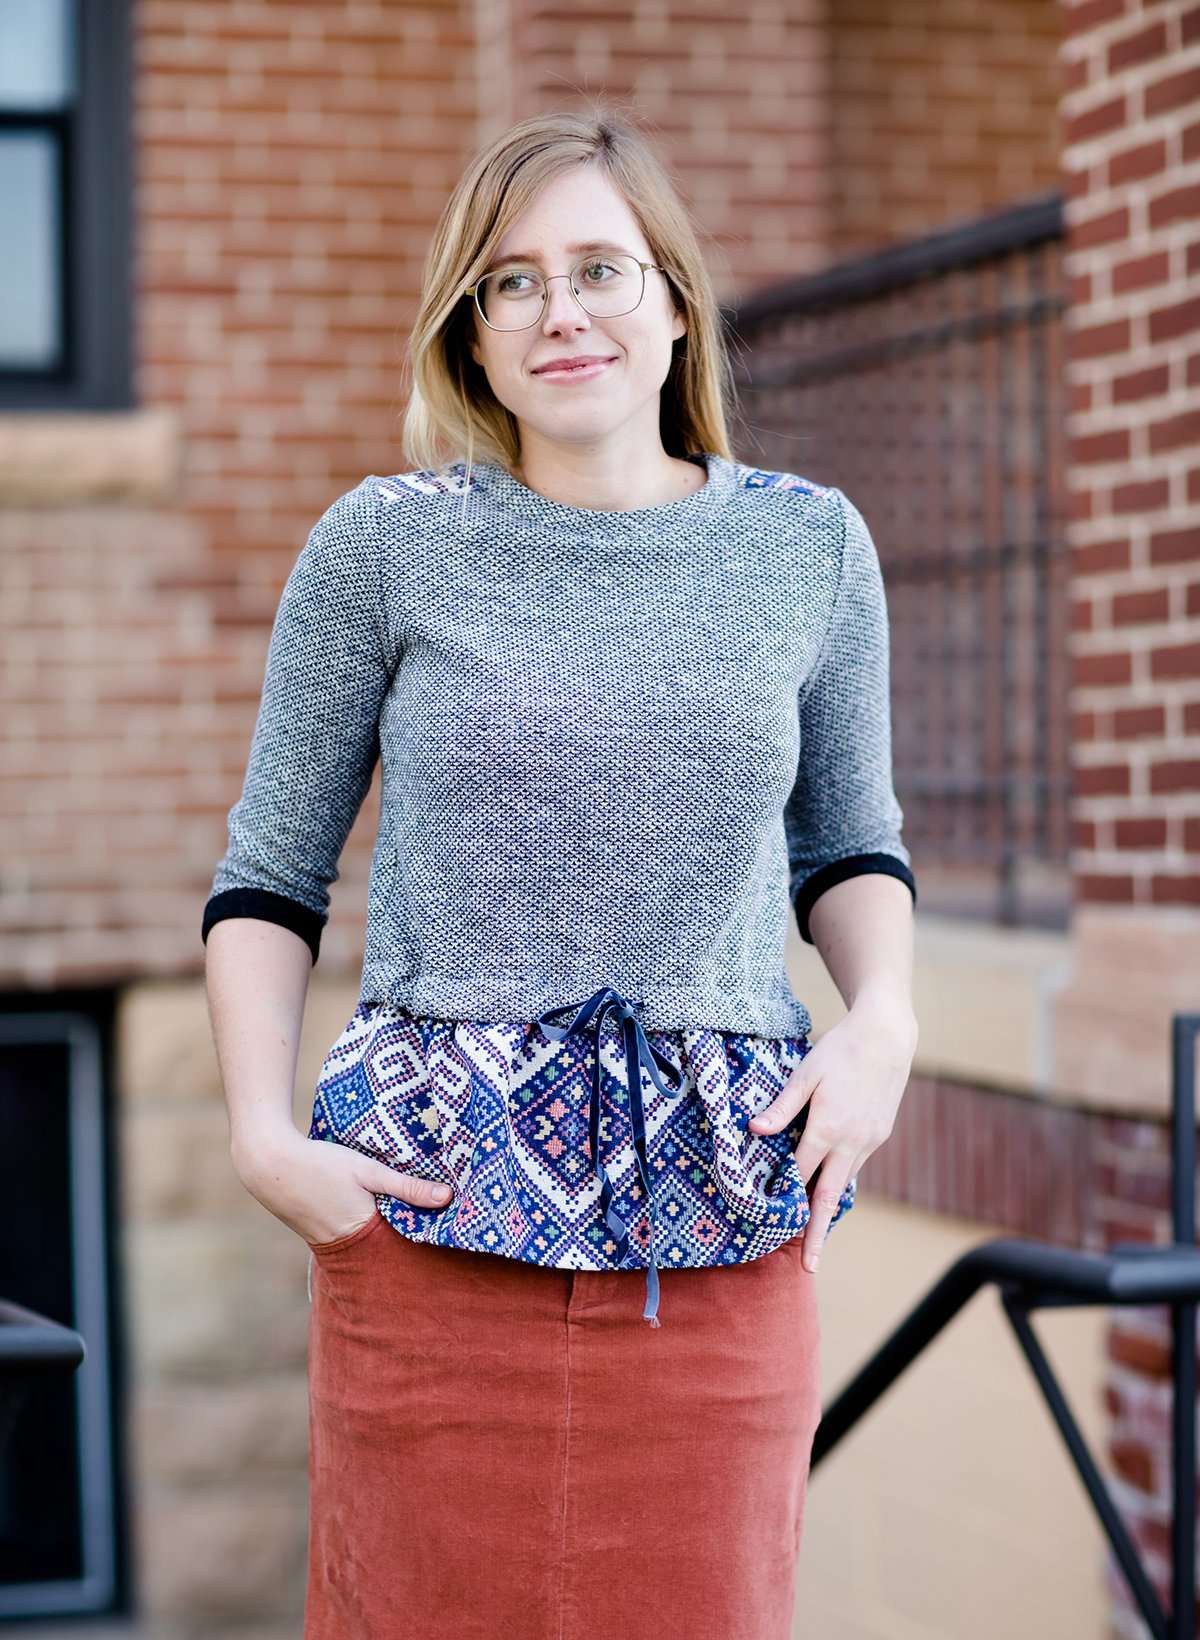 Young woman wearing a polyester navy print sweater like modest peplum top